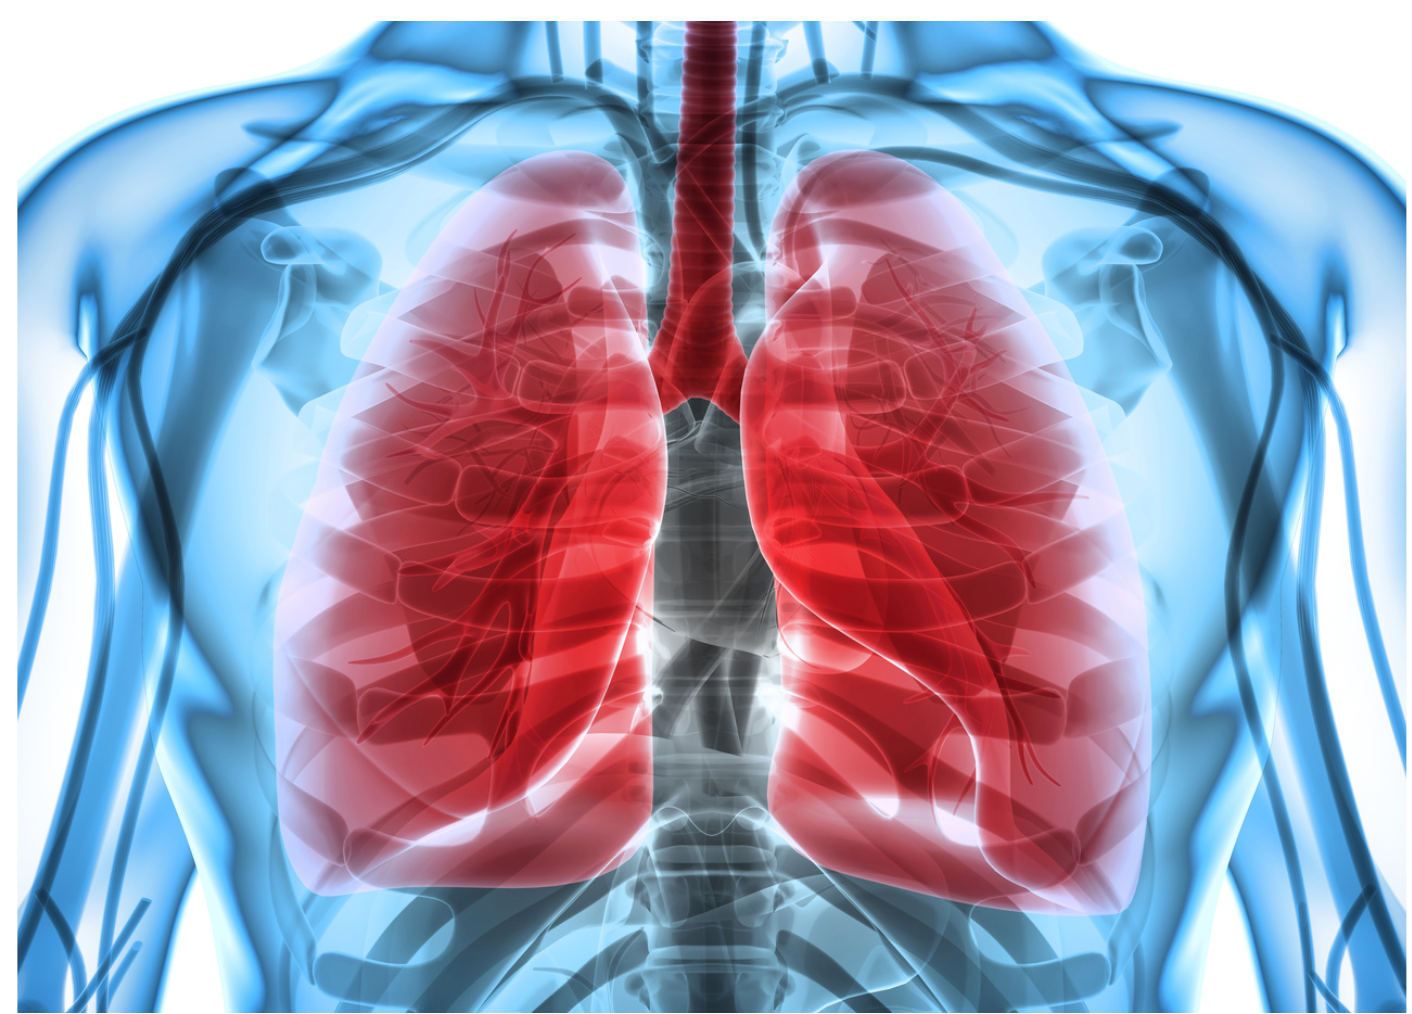 Study Evaluates Impact of CDI on Patients With Cystic Fibrosis